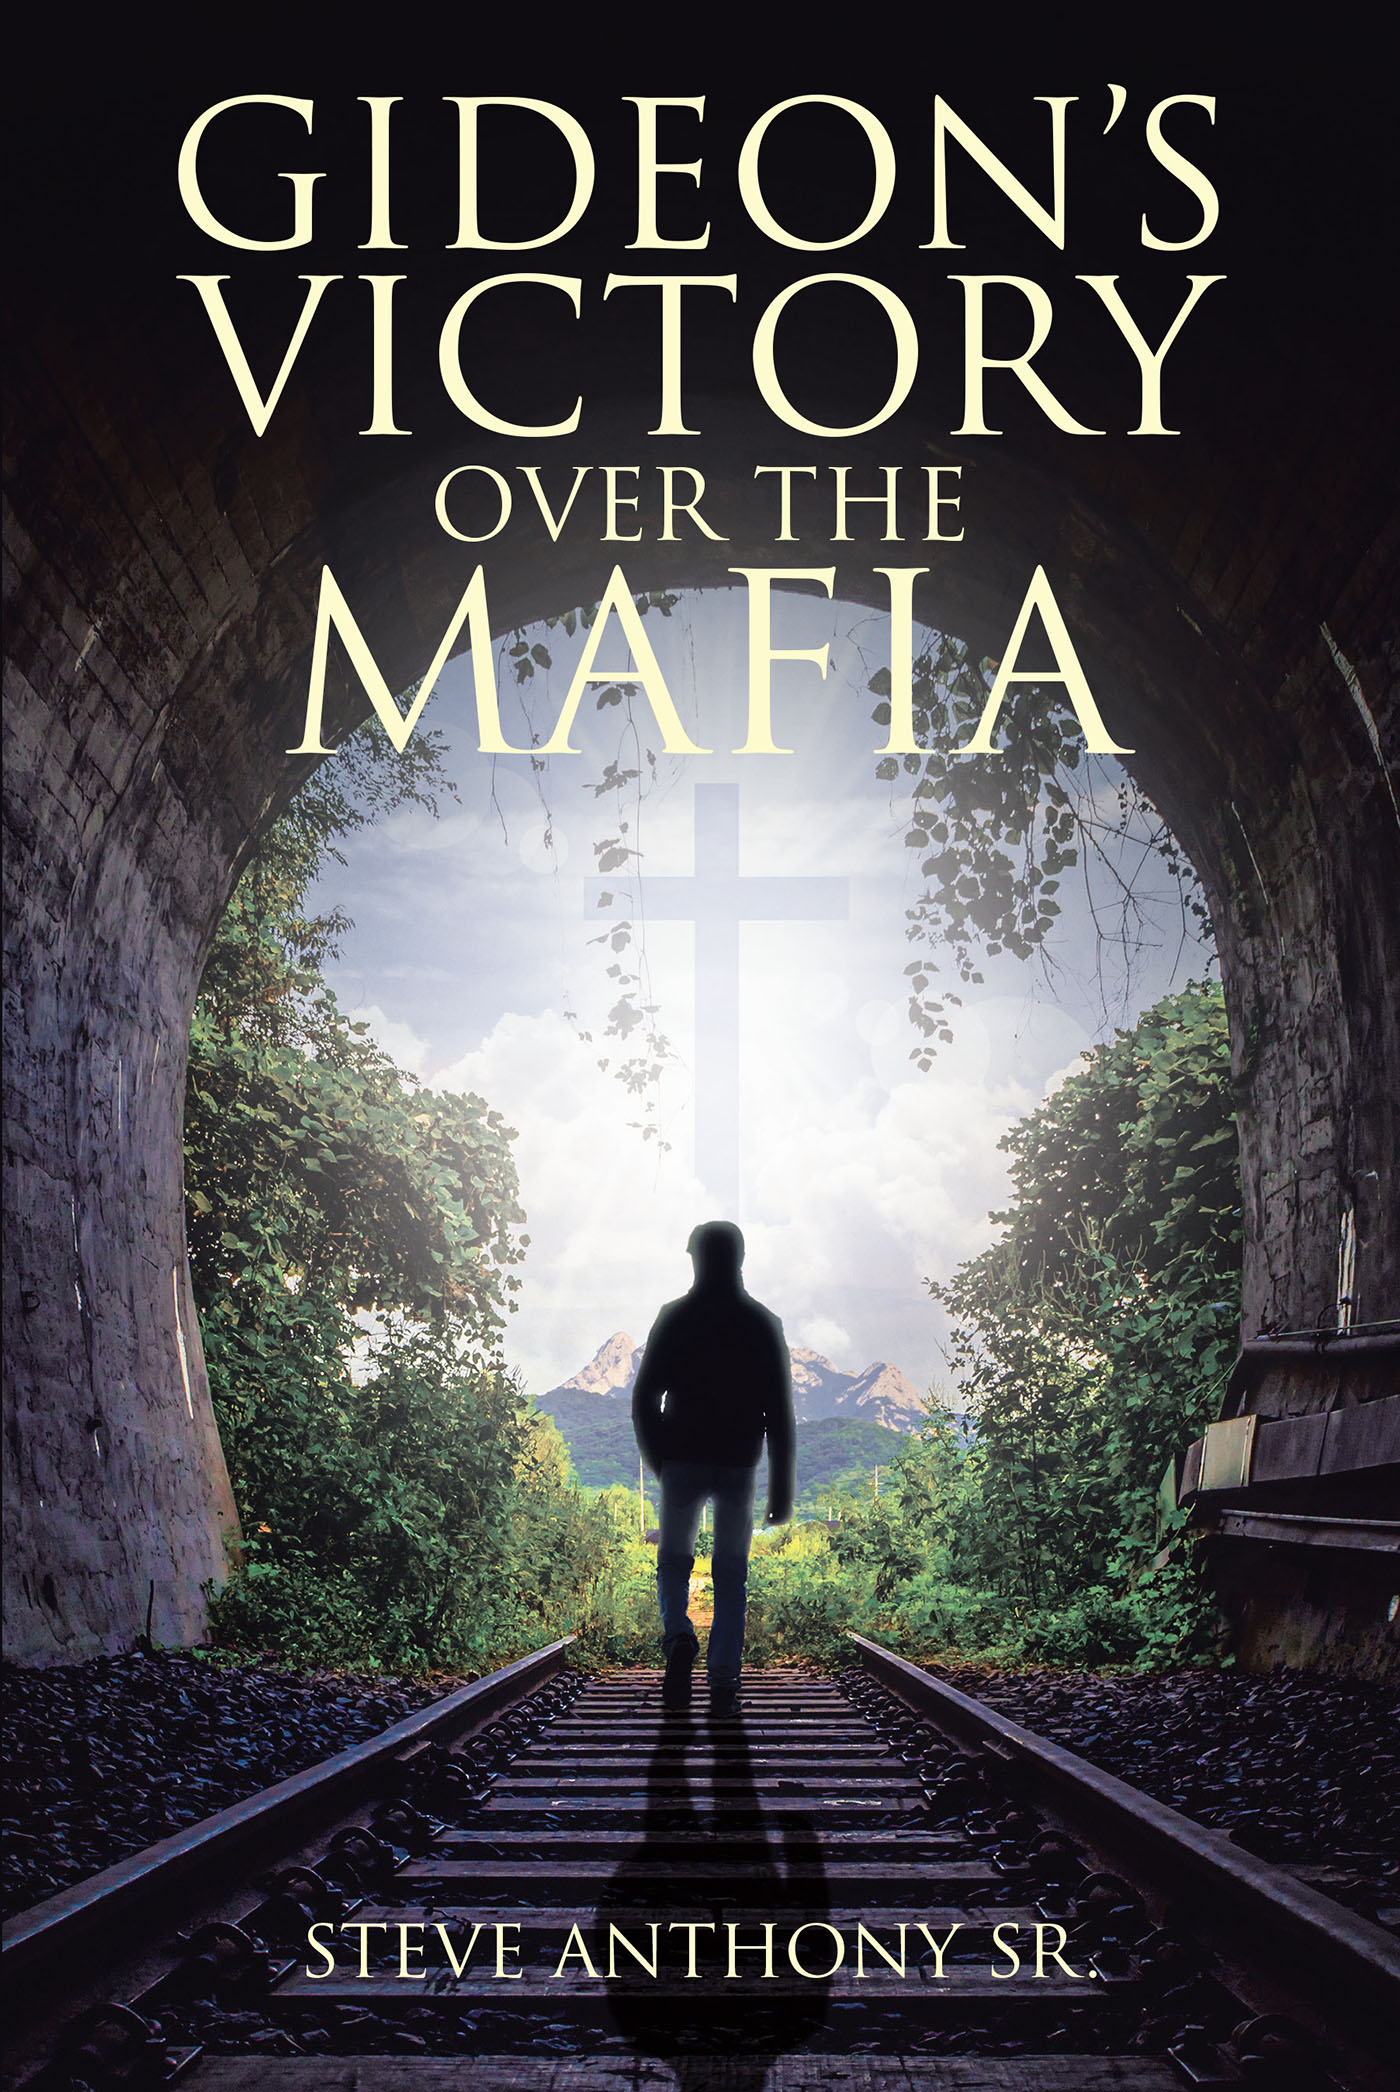 Steve Anthony Sr.’s Newly Released "Gideon’s Victory Over the Mafia" is a Compelling Memoir That Takes Readers Through a Challenging Rebirth in Christ